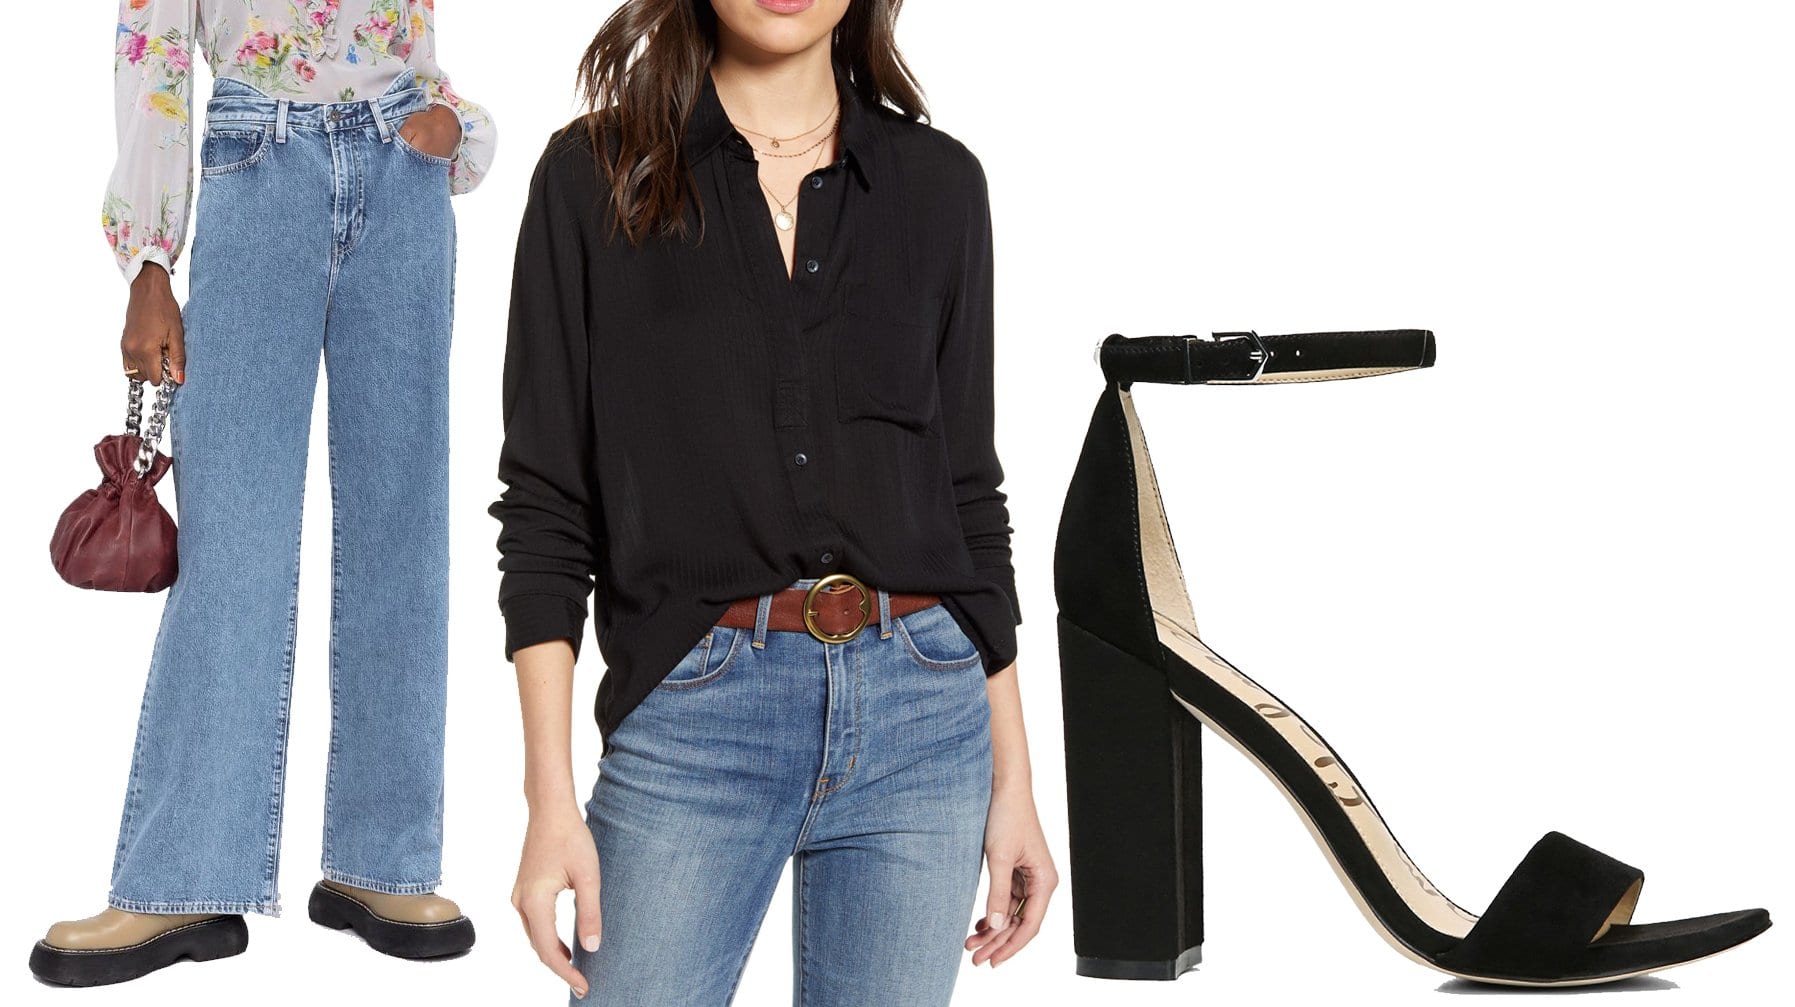 Levi's: Made & Crafted Wide-Leg Jeans, Treasure & Bond Dobby Classic Shirt, Sam Edelman Yaro Ankle-Strap Suede Sandals